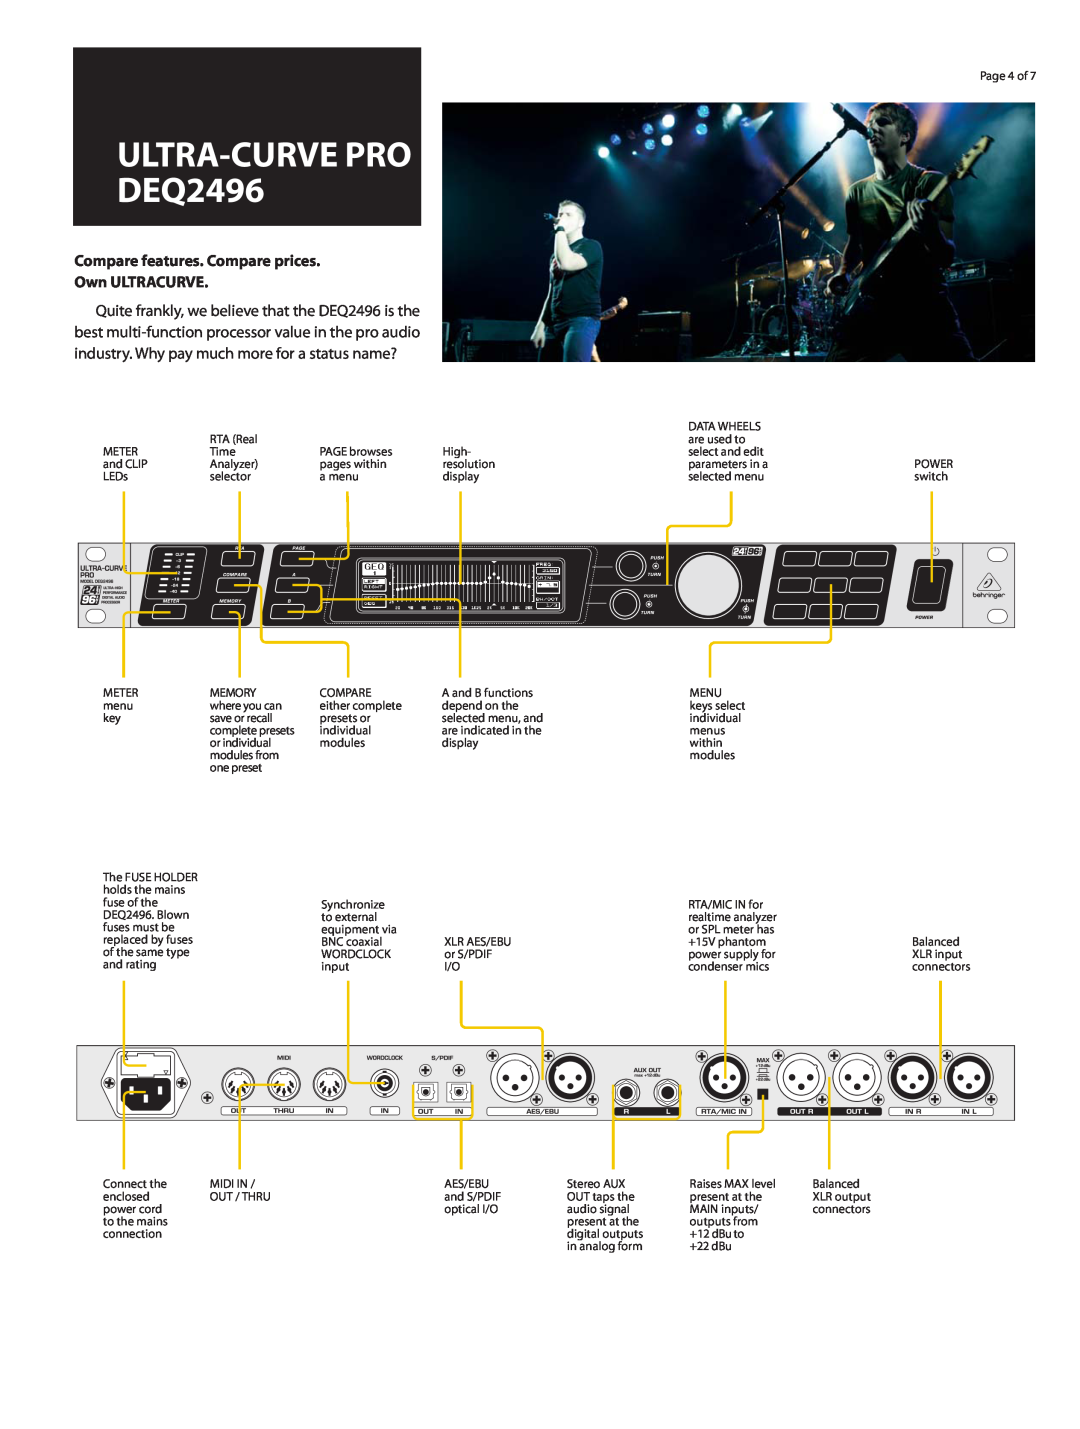 Behringer manual Compare features. Compare prices Own ULTRACURVE, ULTRA-CURVEPRO DEQ2496 